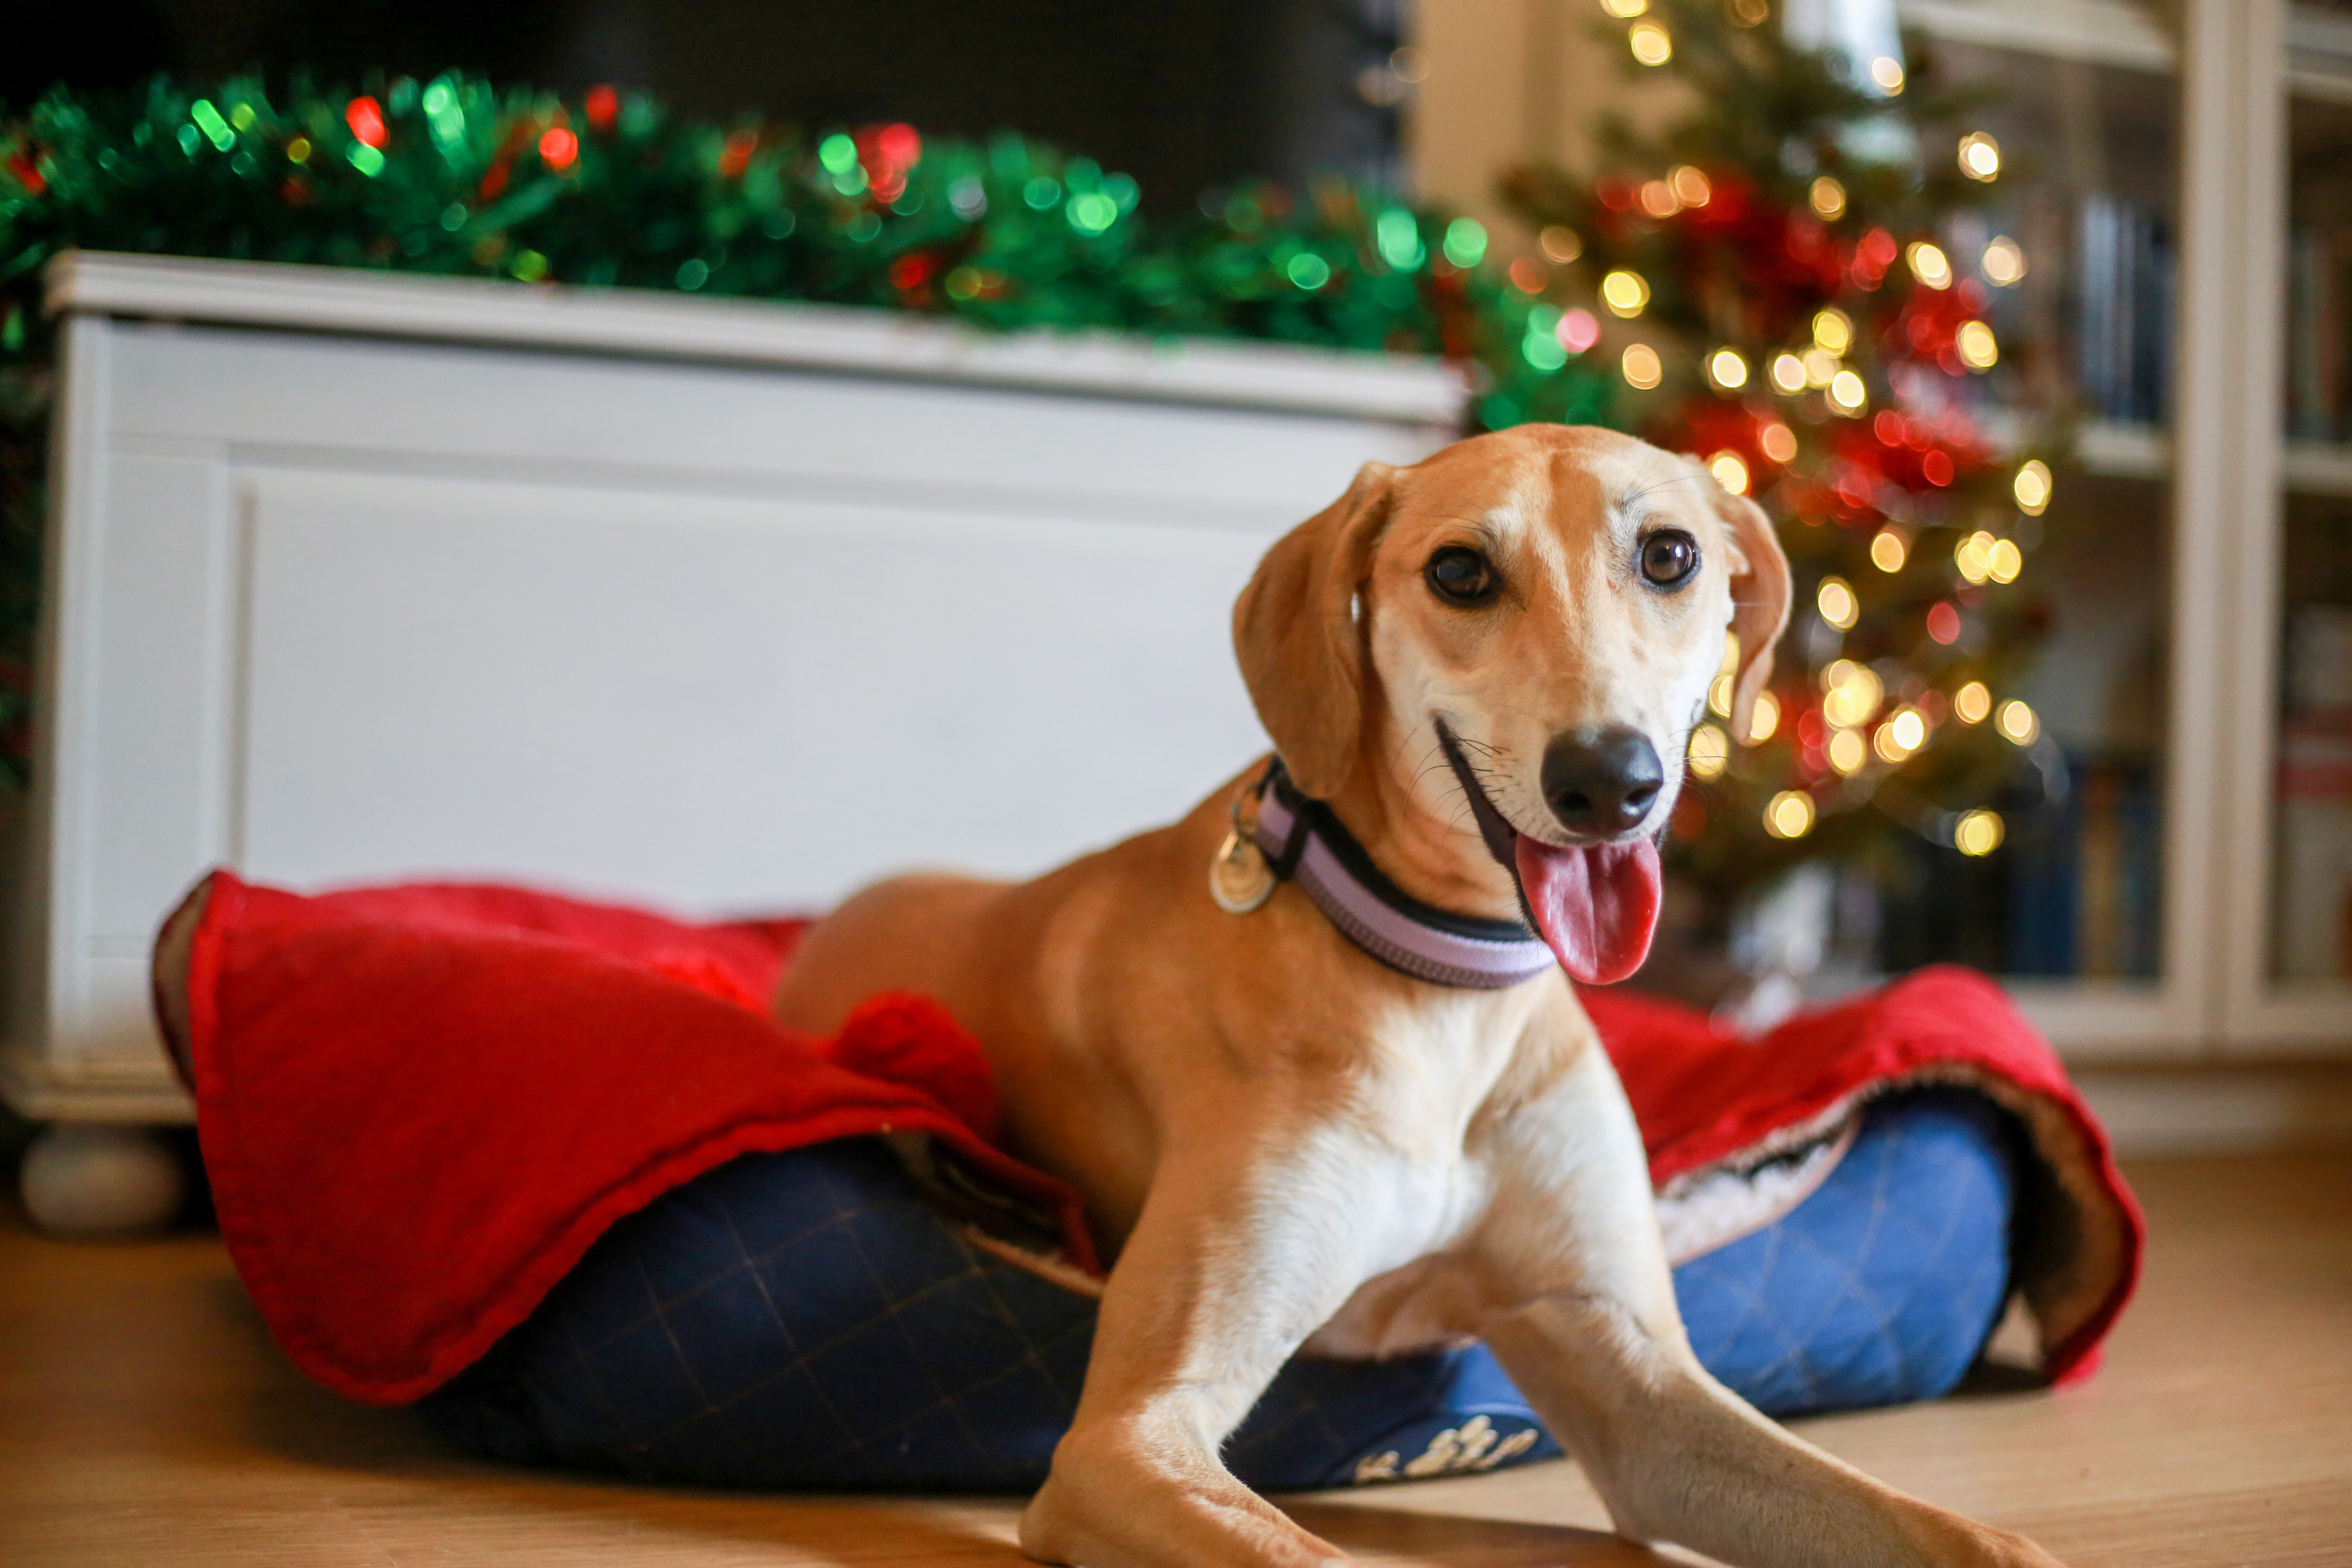 Fawn lurcher May smiles at the camera from her be with a Christmas tree in the background